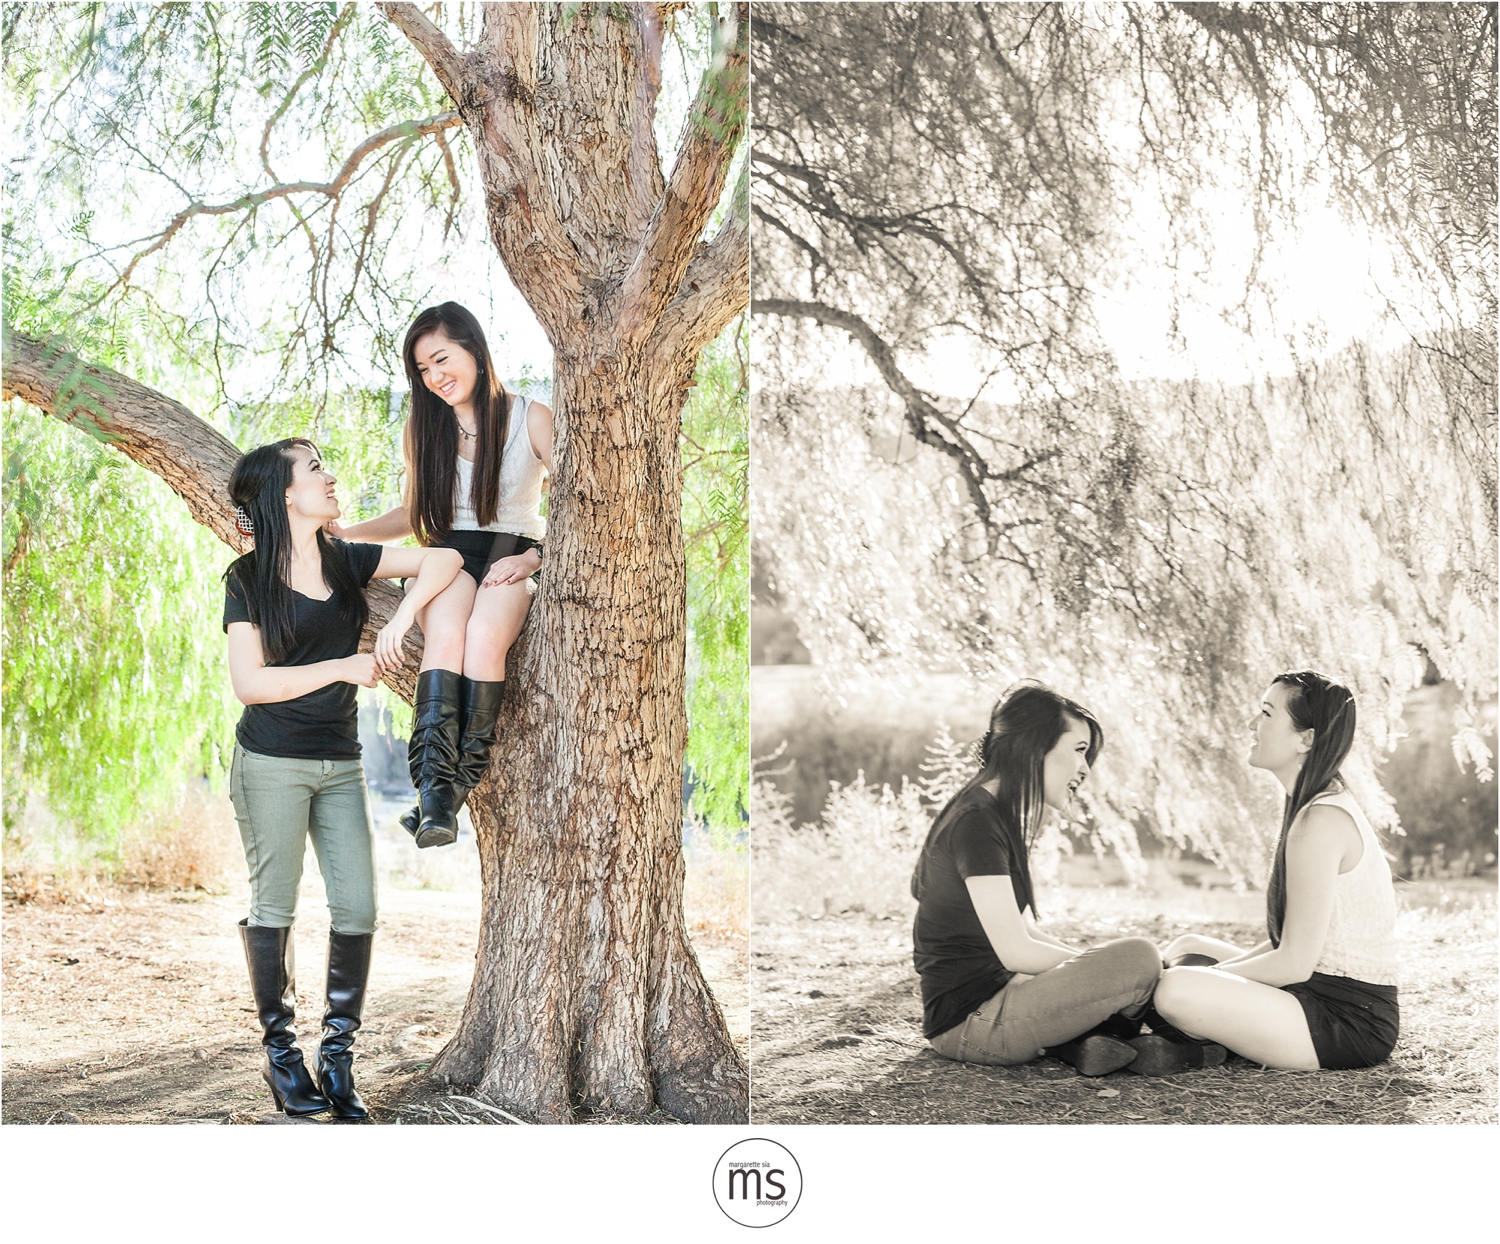 Tiffany & Natalie Old Town Temecula Margarette Sia Photography_0060